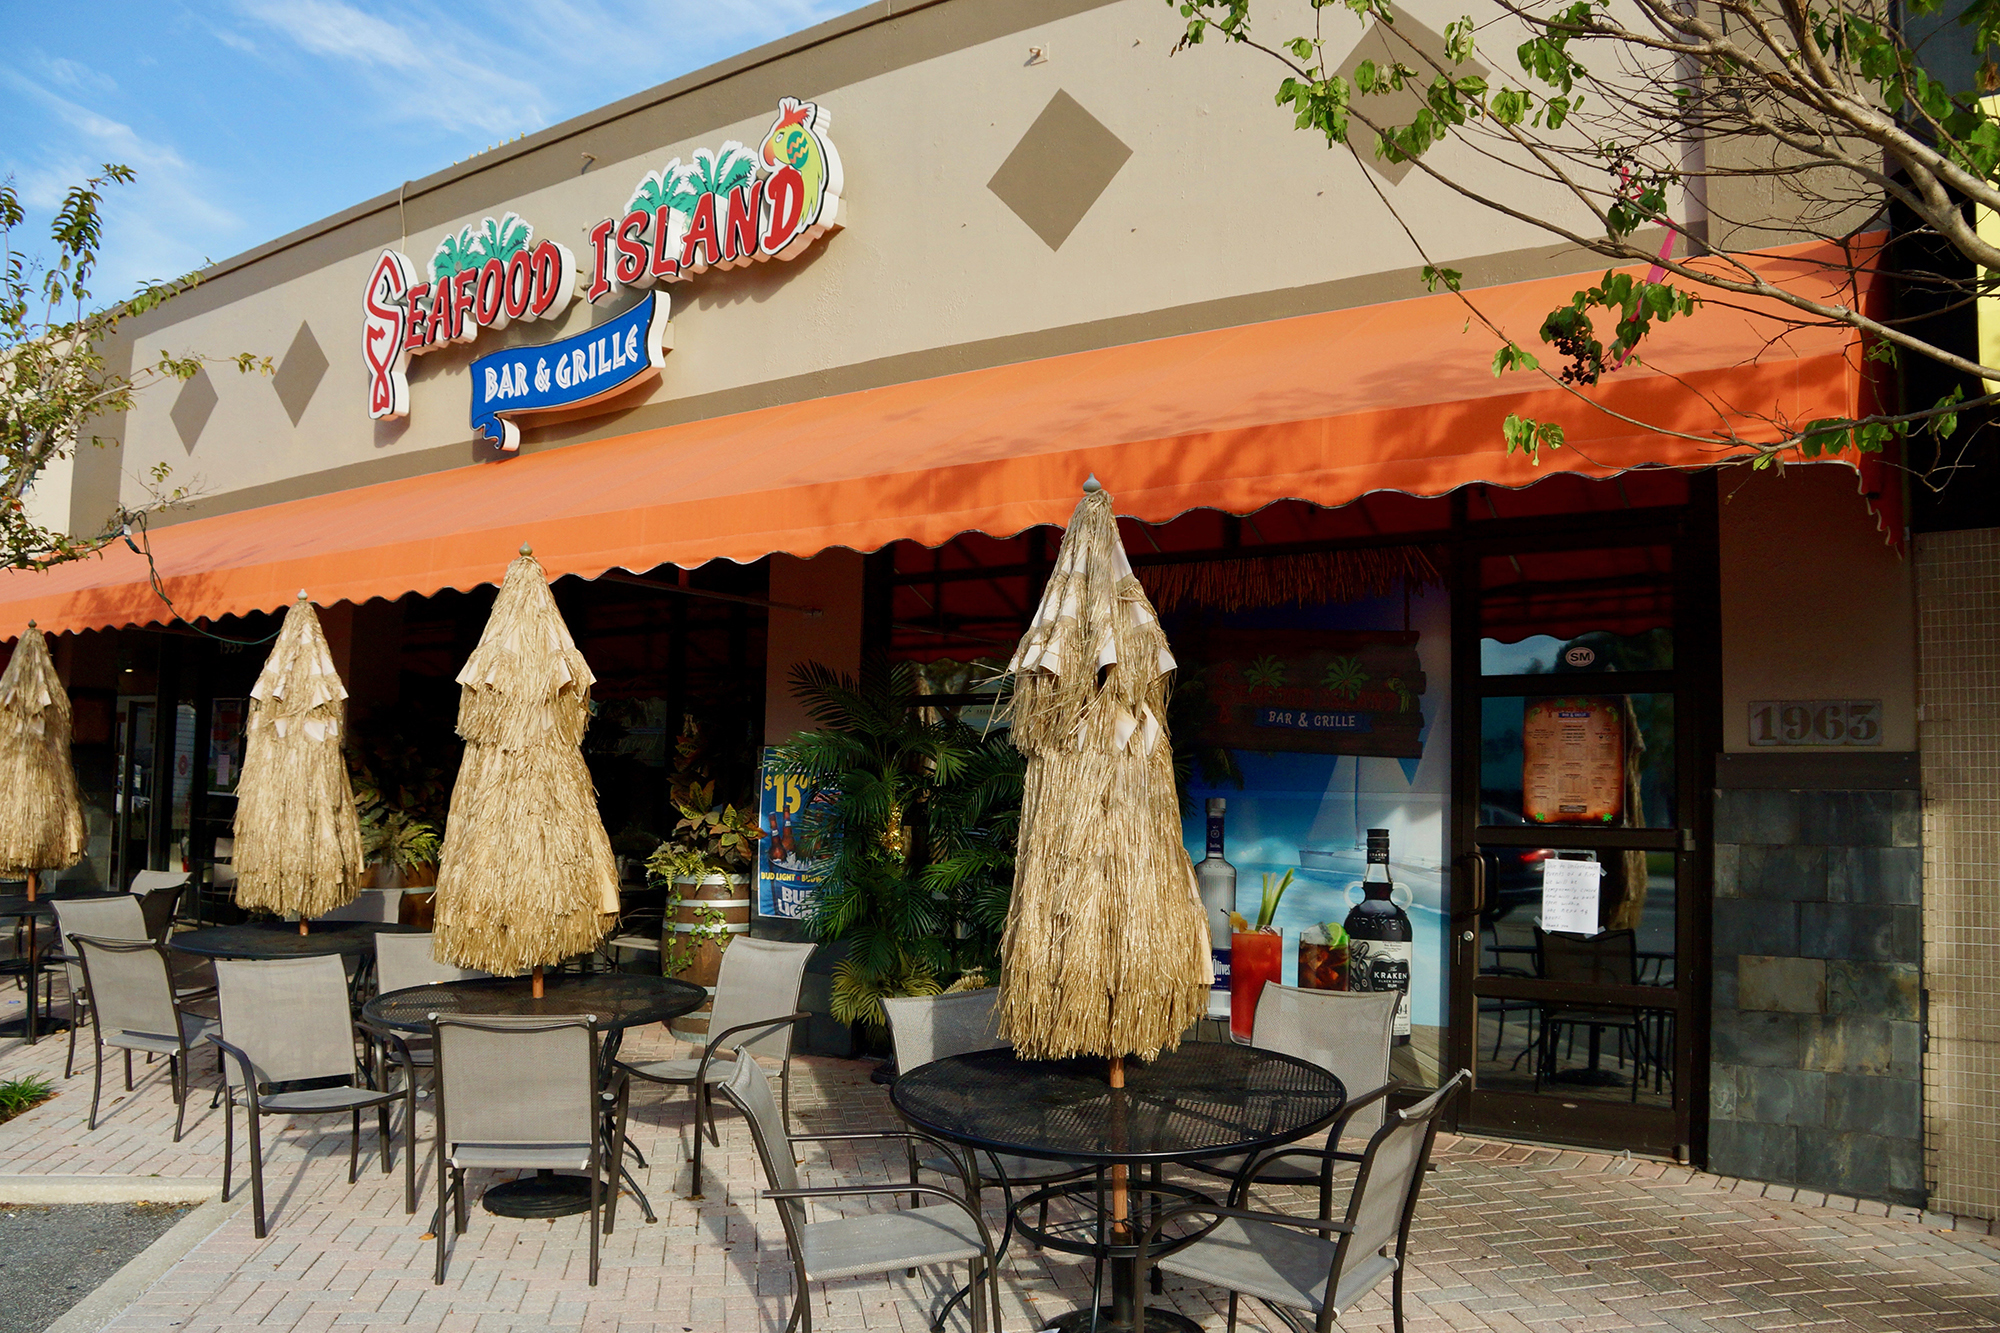 Seafood Island Bar and Grille posted signs on its door that it would reopen on Wednesday